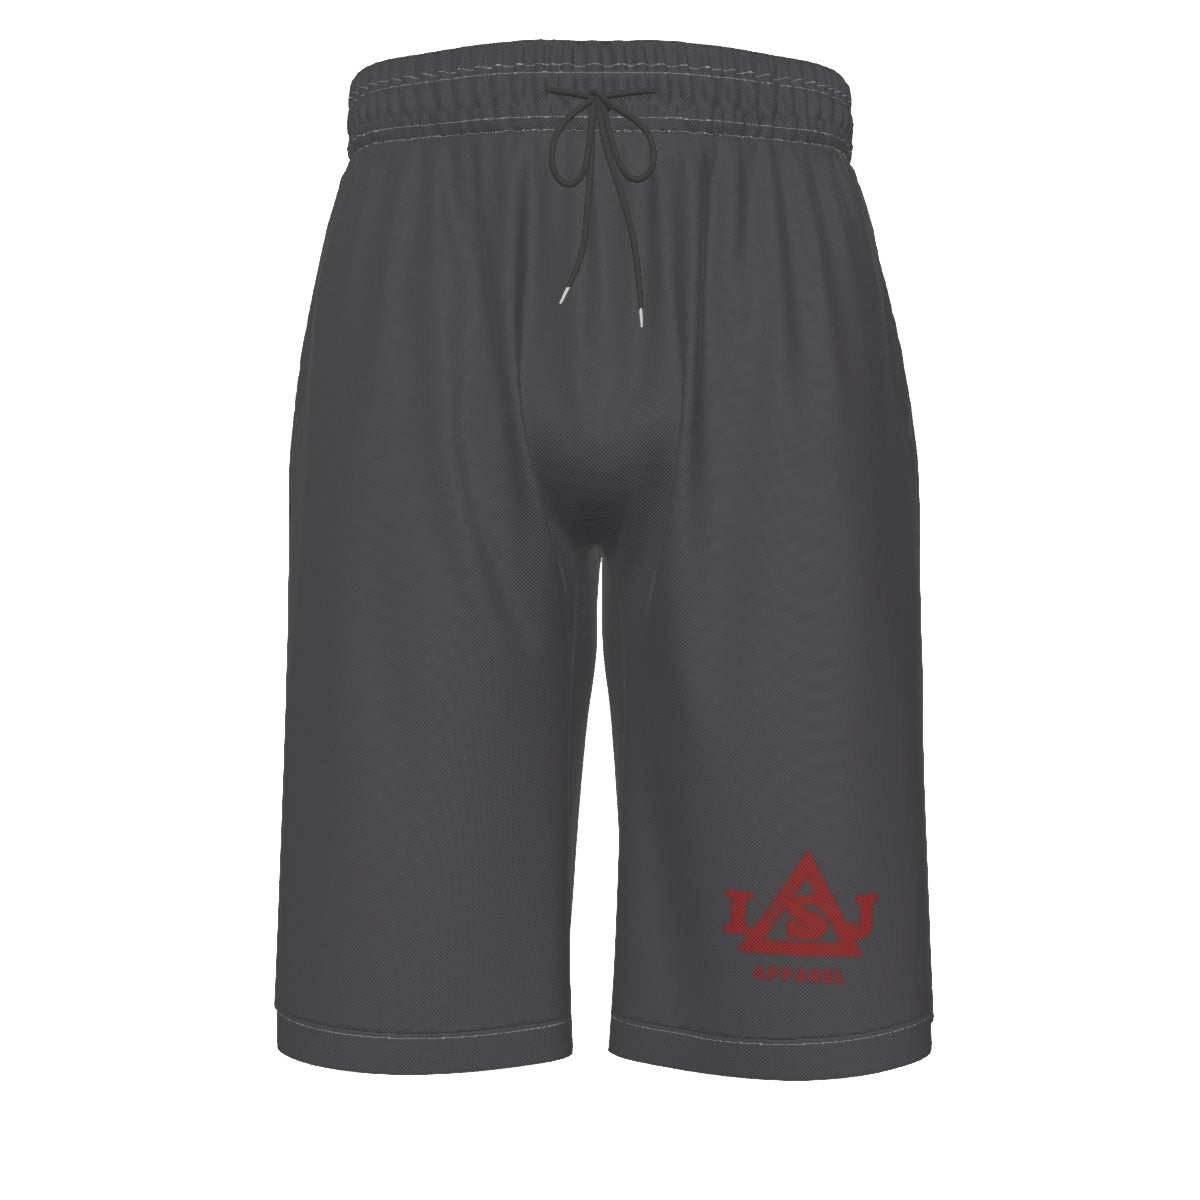 Matte Gray & Red Over-The-Knee Shorts